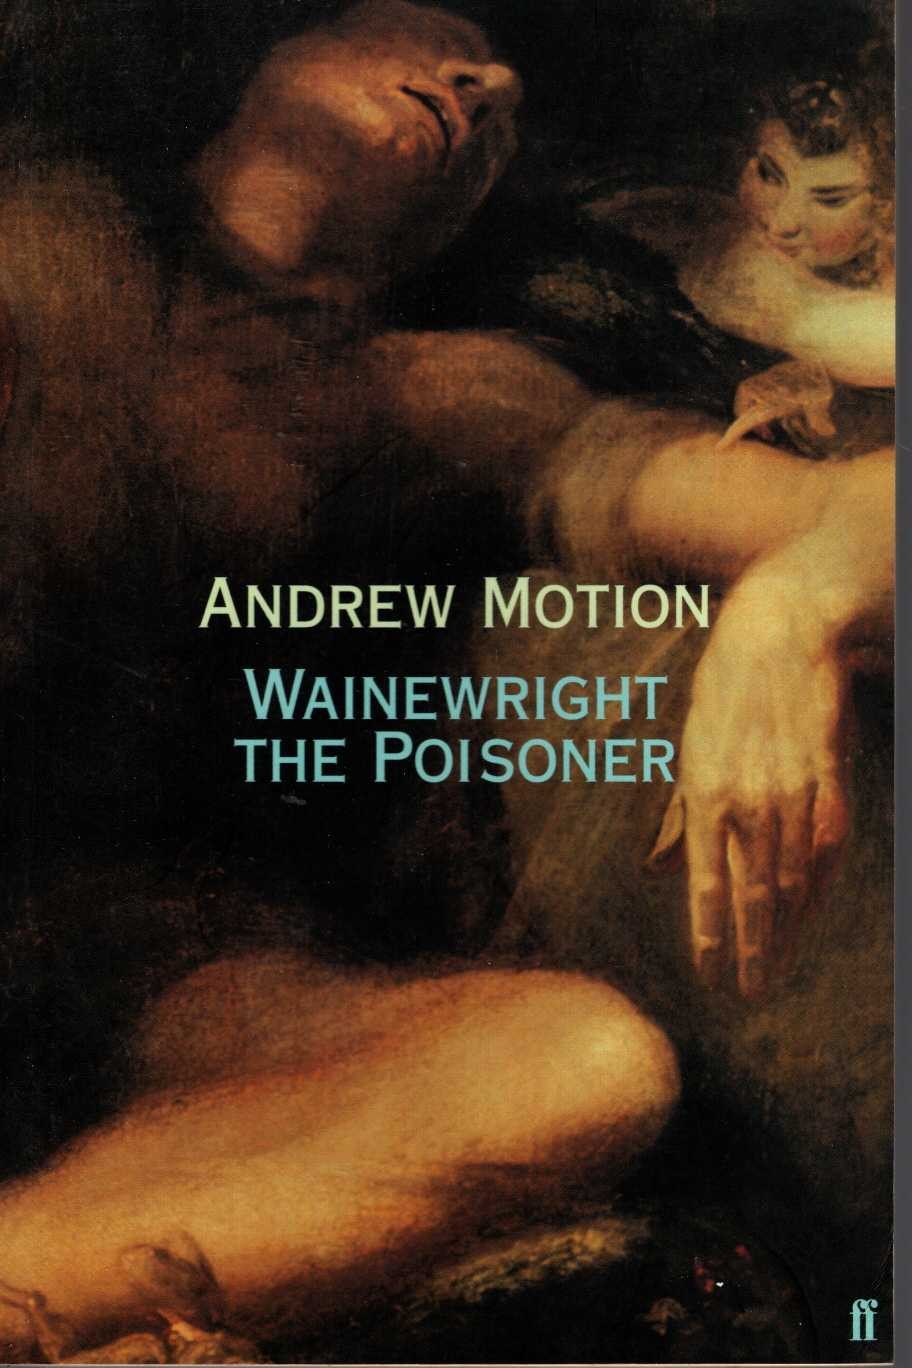 Andrew Motion  WAINEWRIGHT THE POISONER front book cover image